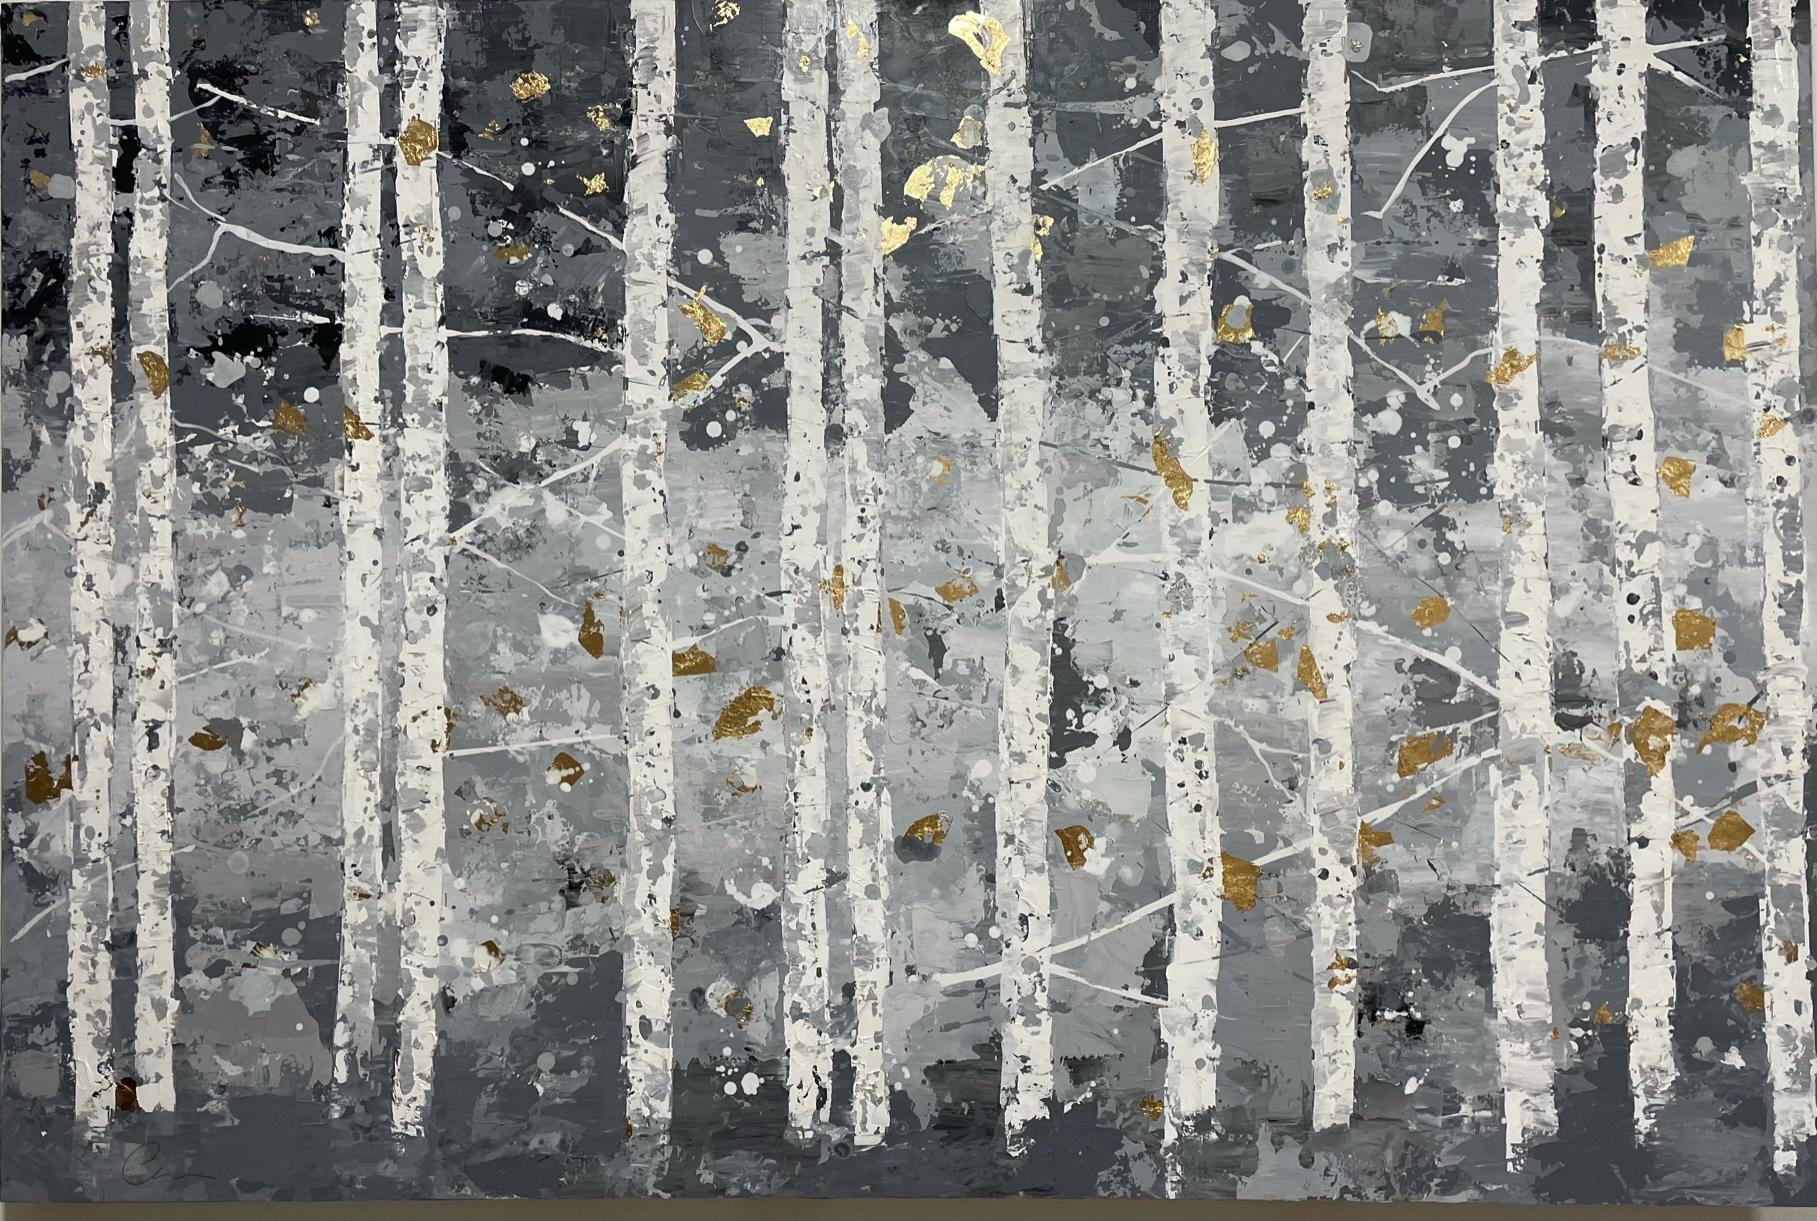 Chelsea Davine Figurative Painting - First Snowfall in Grey- 21st C., Contemporary, Abstract, Oil Painting, Gold Leaf